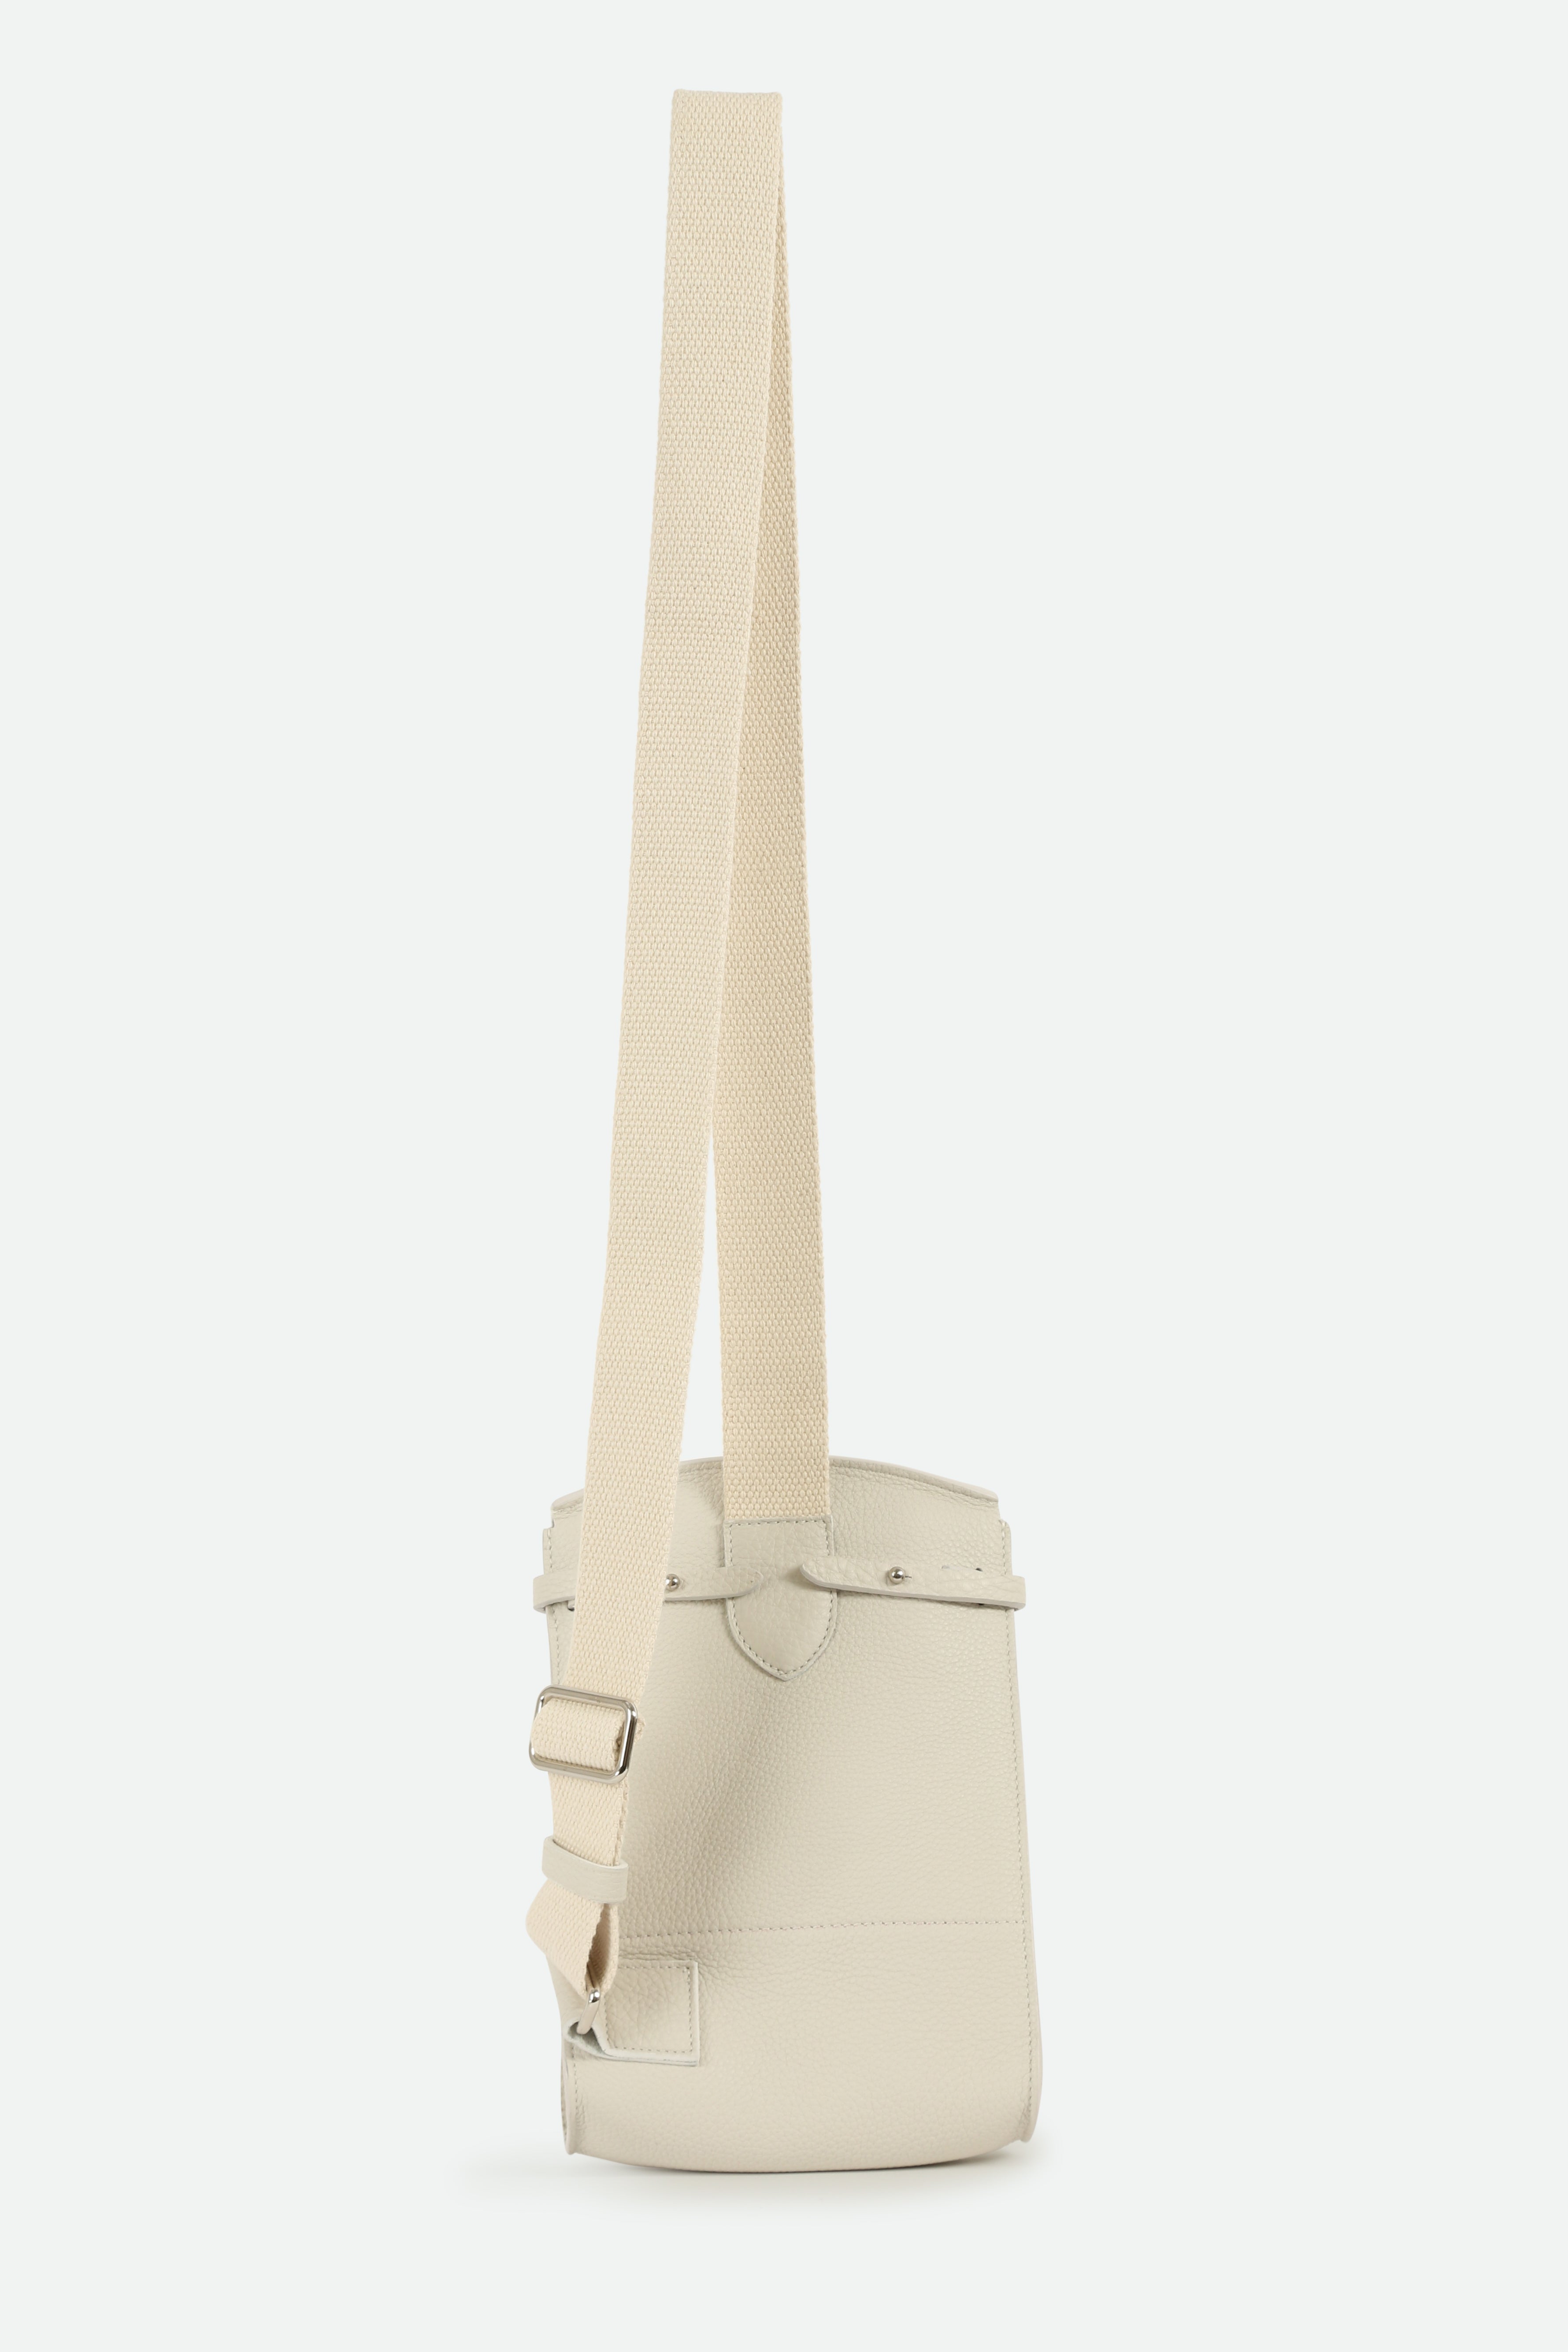 MONZA ITALIAN LEATHER CROSSBODY BUTTER WHITE - PRE-ORDER NOW